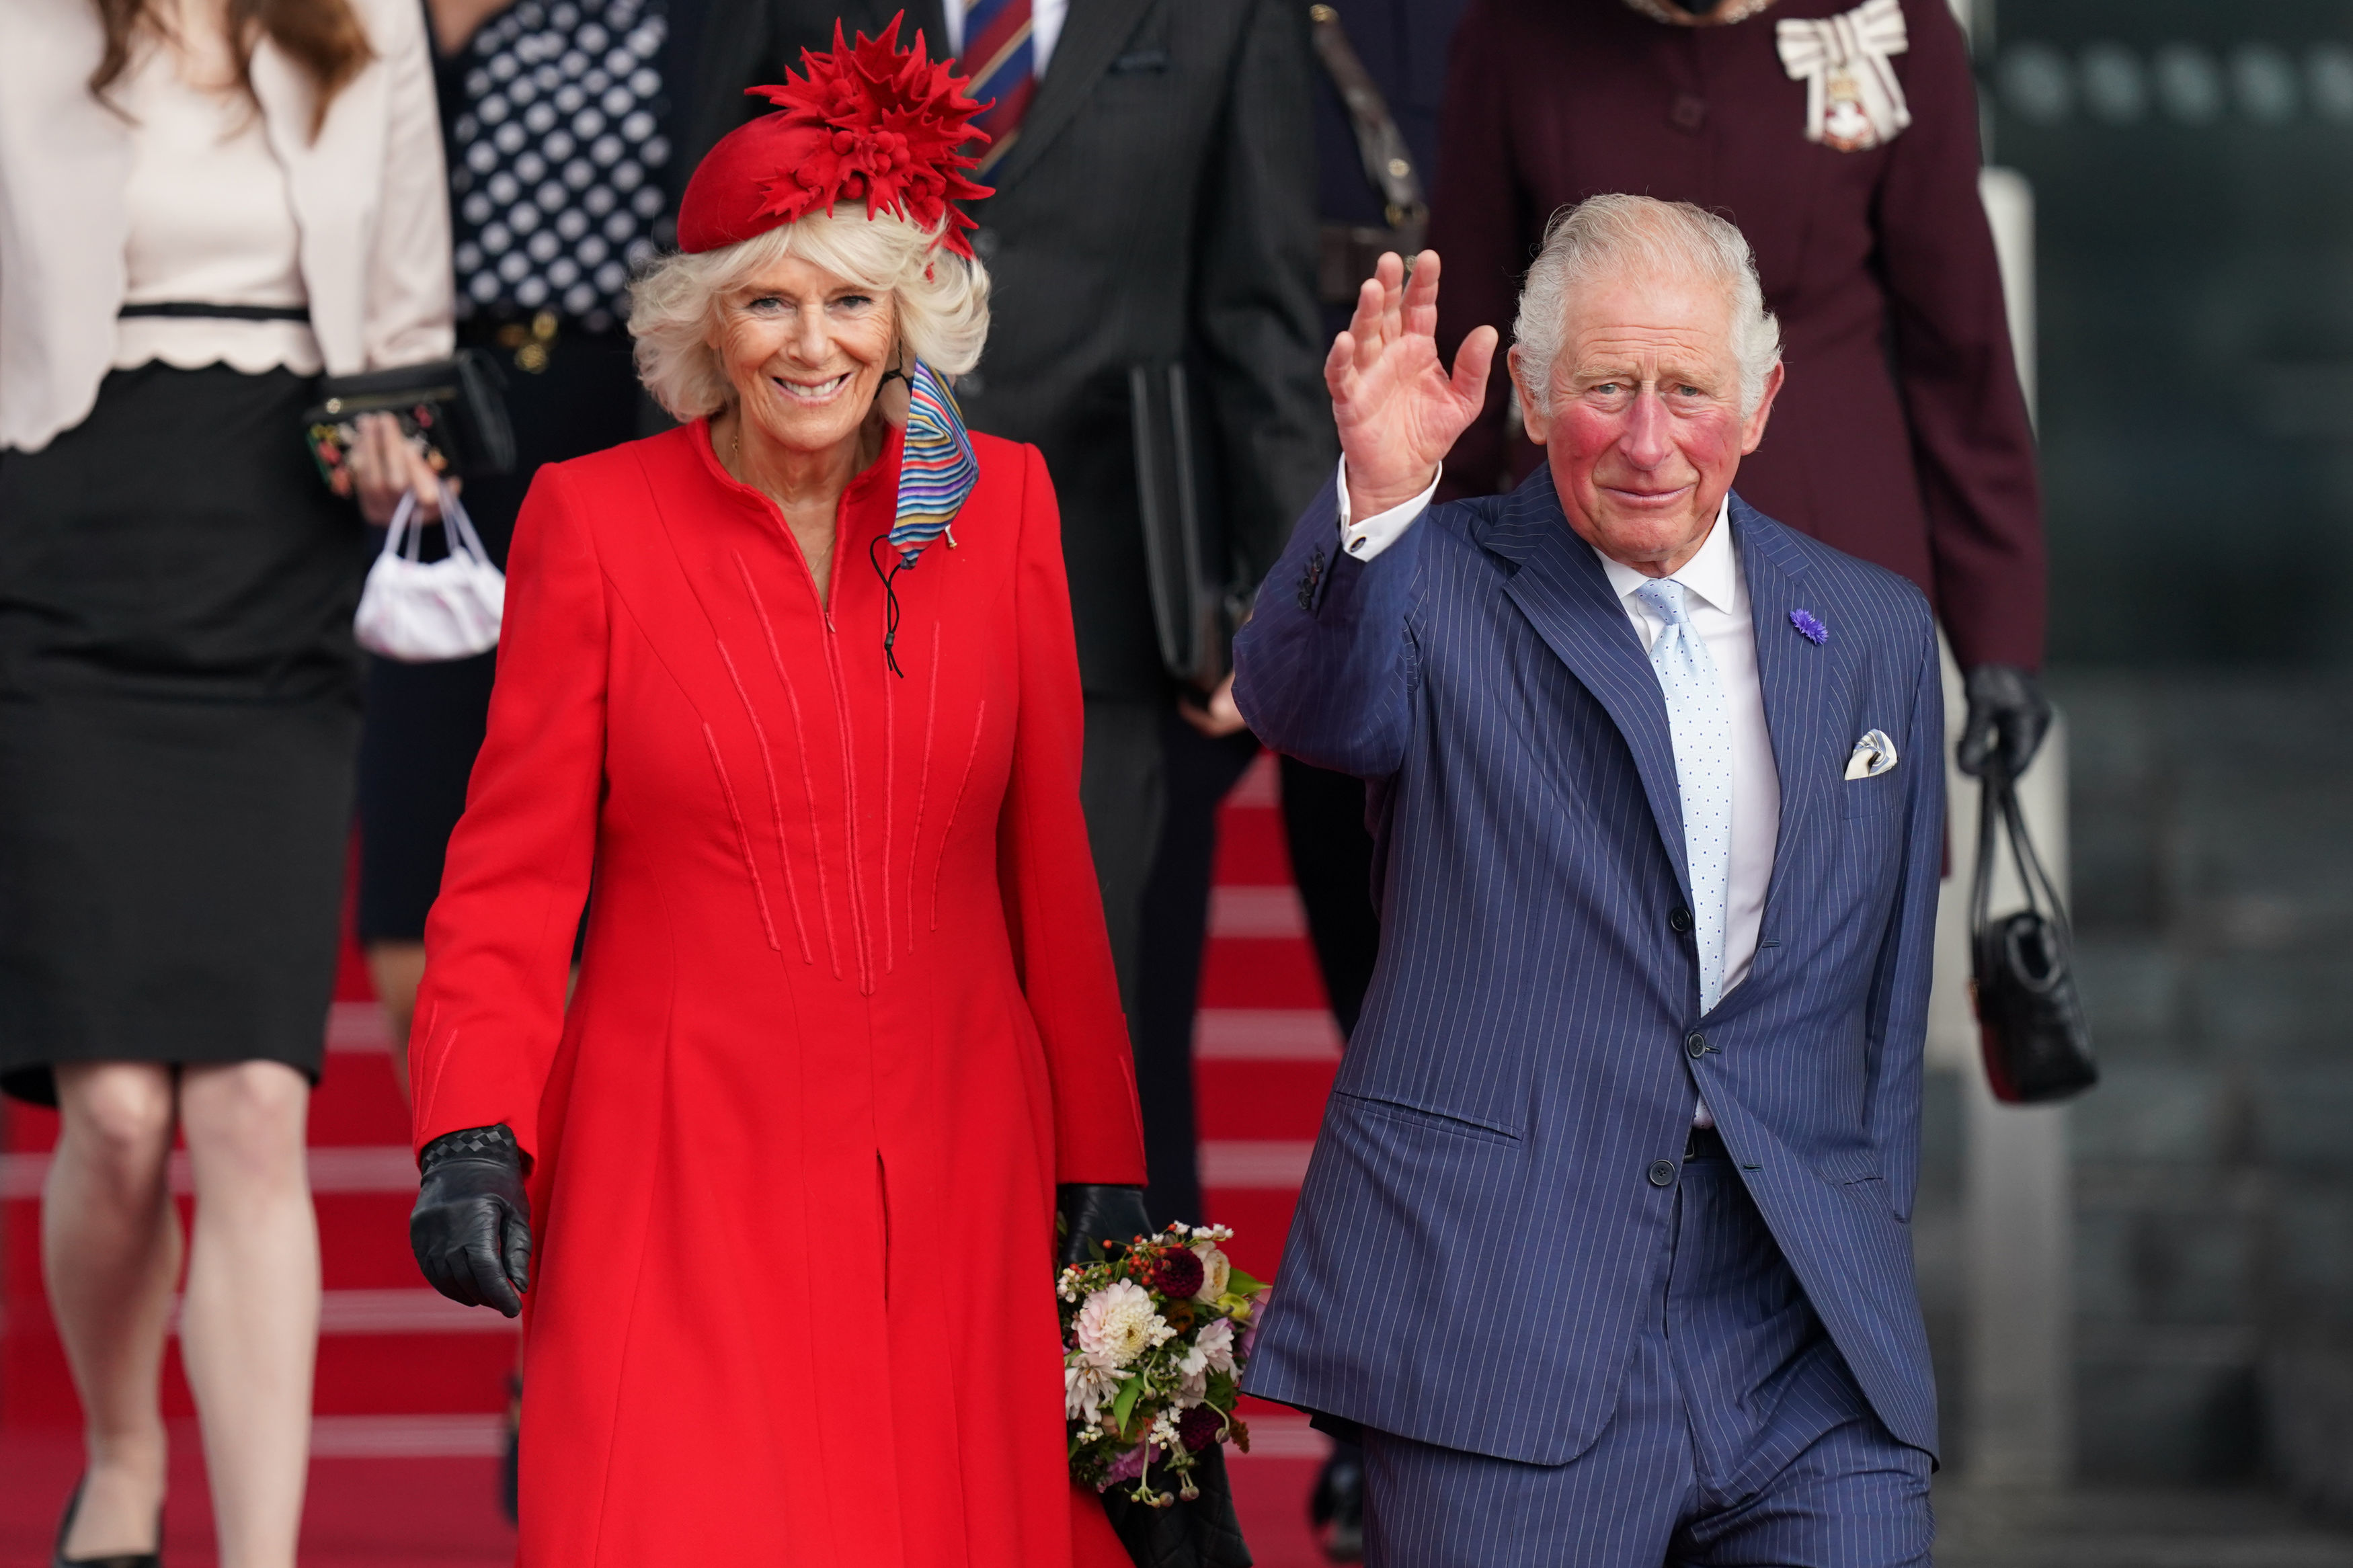 Camilla Parker Bowles Worked Her Magic on Prince Charles to Change Him Completely, Royal Authors Say